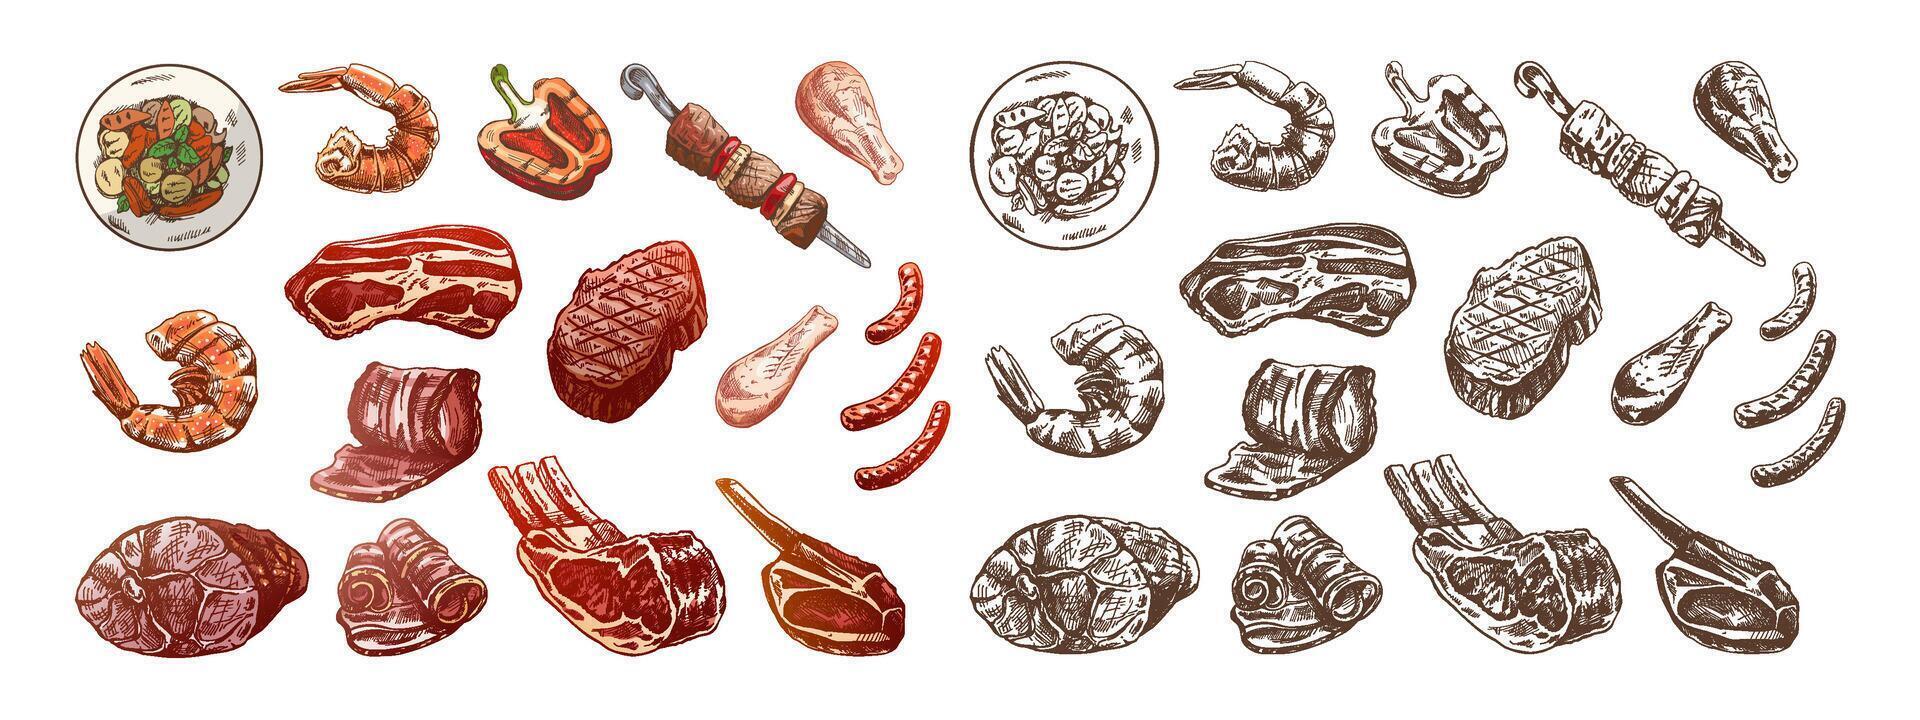 Set of hand-drawn colored and monochrome sketches of different types of meat, steaks, shrimp, chicken, grilled vegetables, barbecue. Doodle vintage illustration. Engraved image. vector